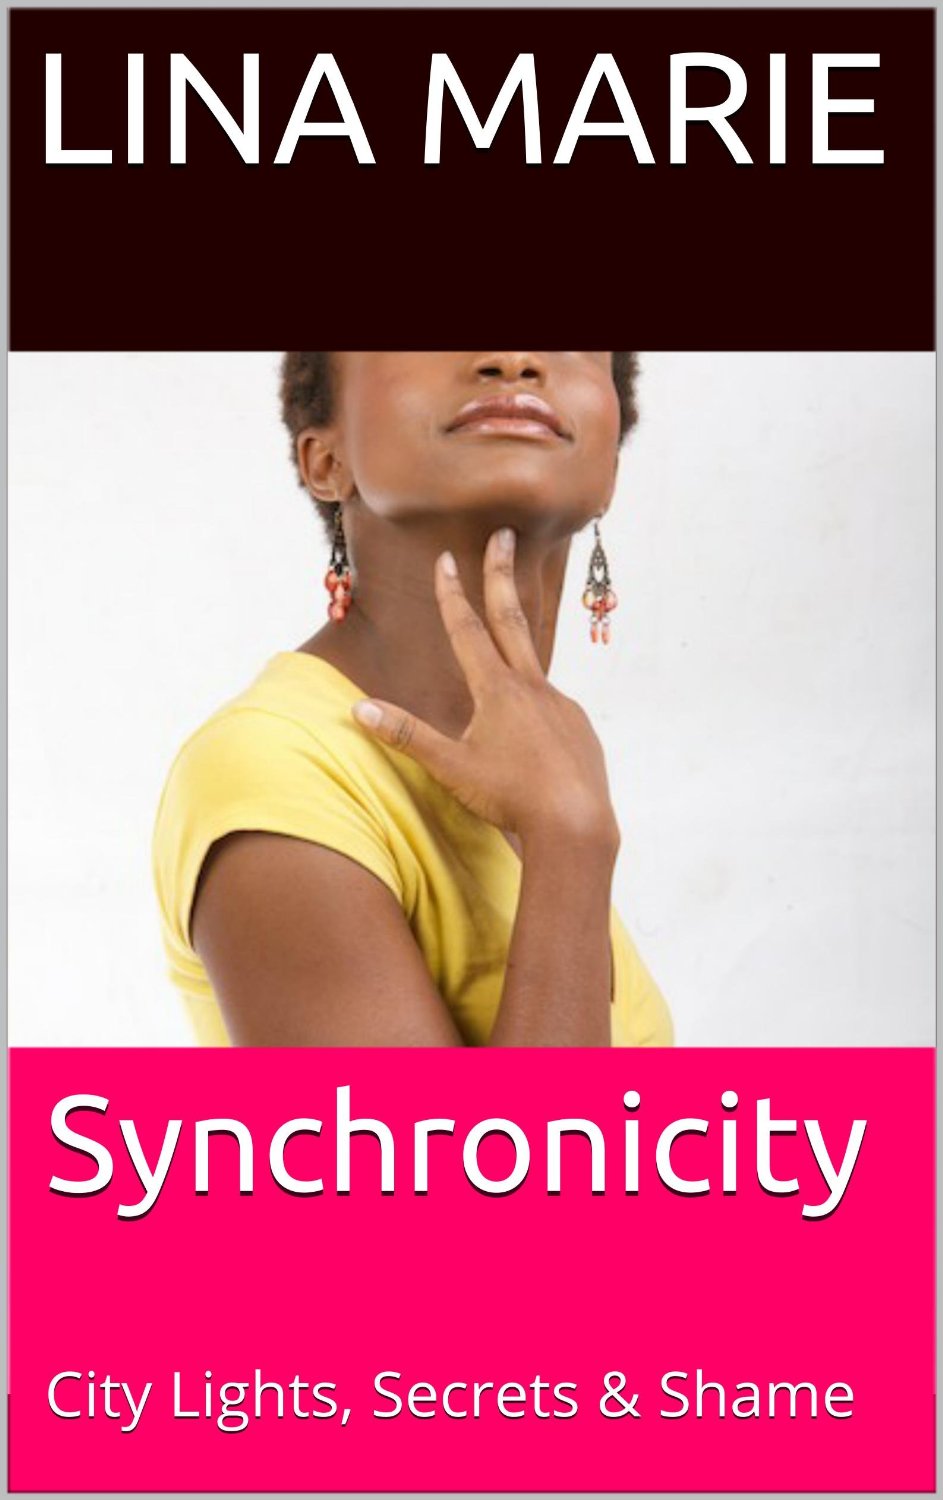 Synchronicity by Lina Marie